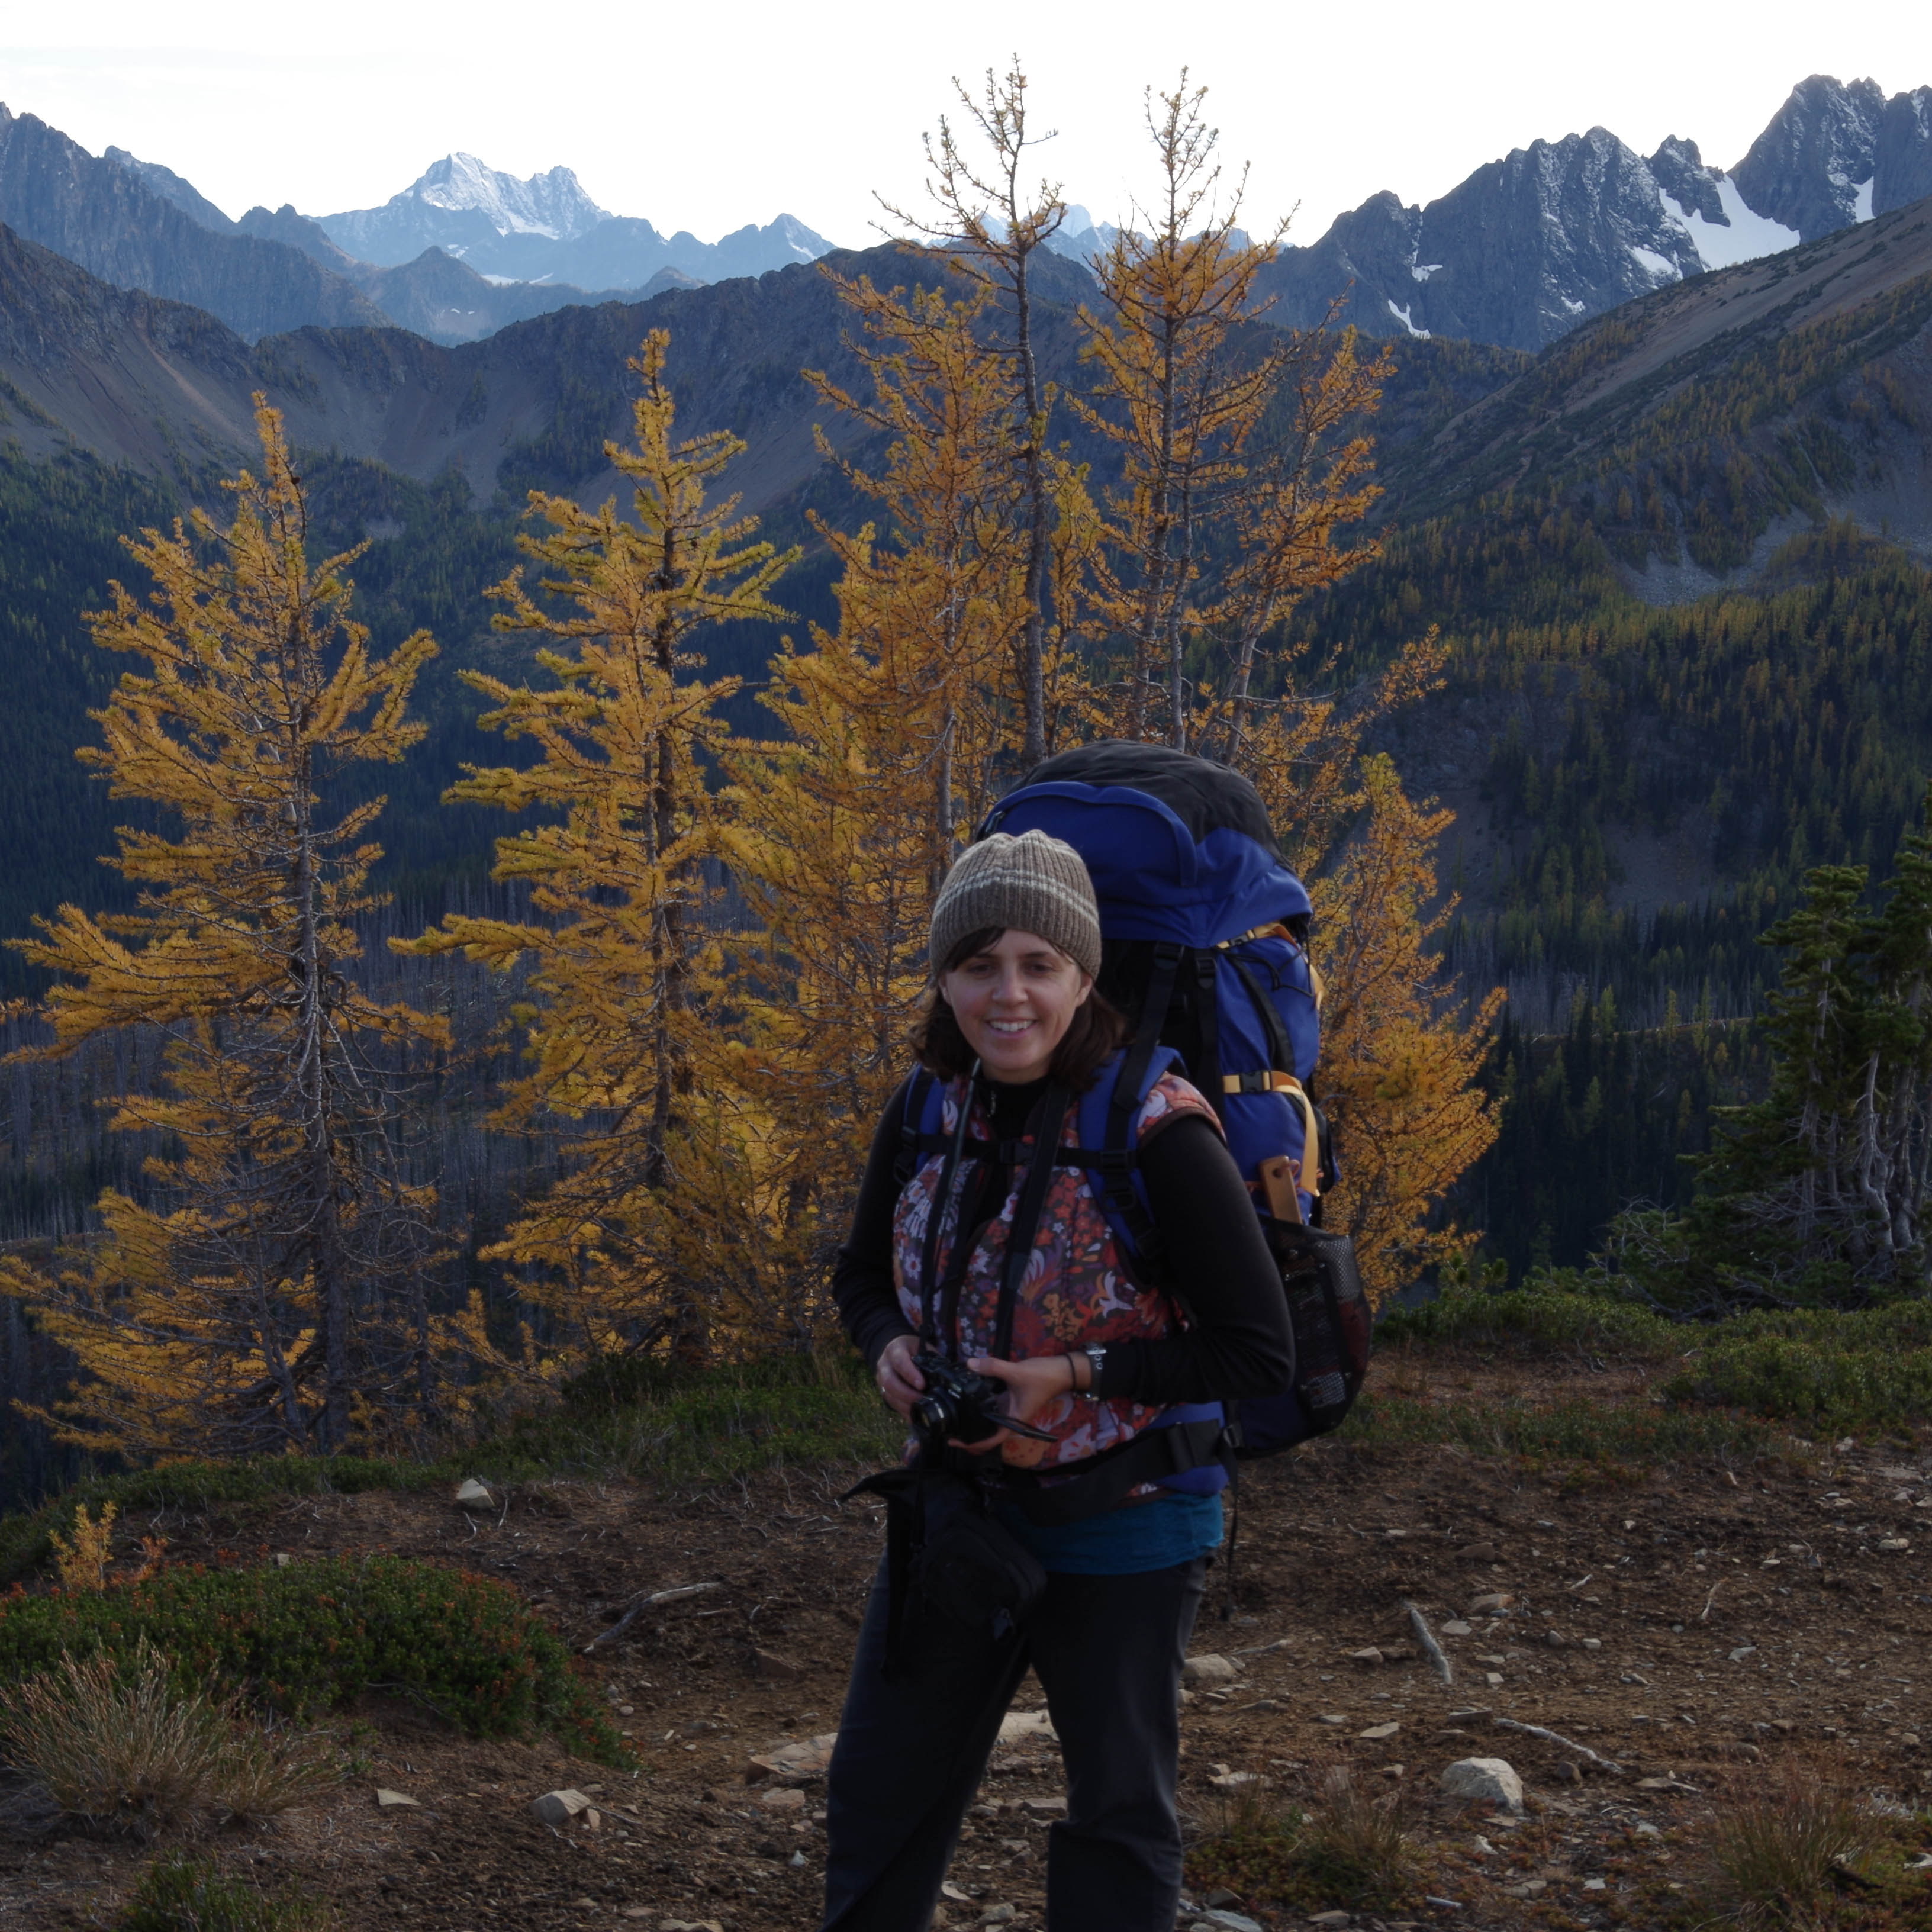 Kirsten Drickey outside, hiking along a trail with mountains and trees in background